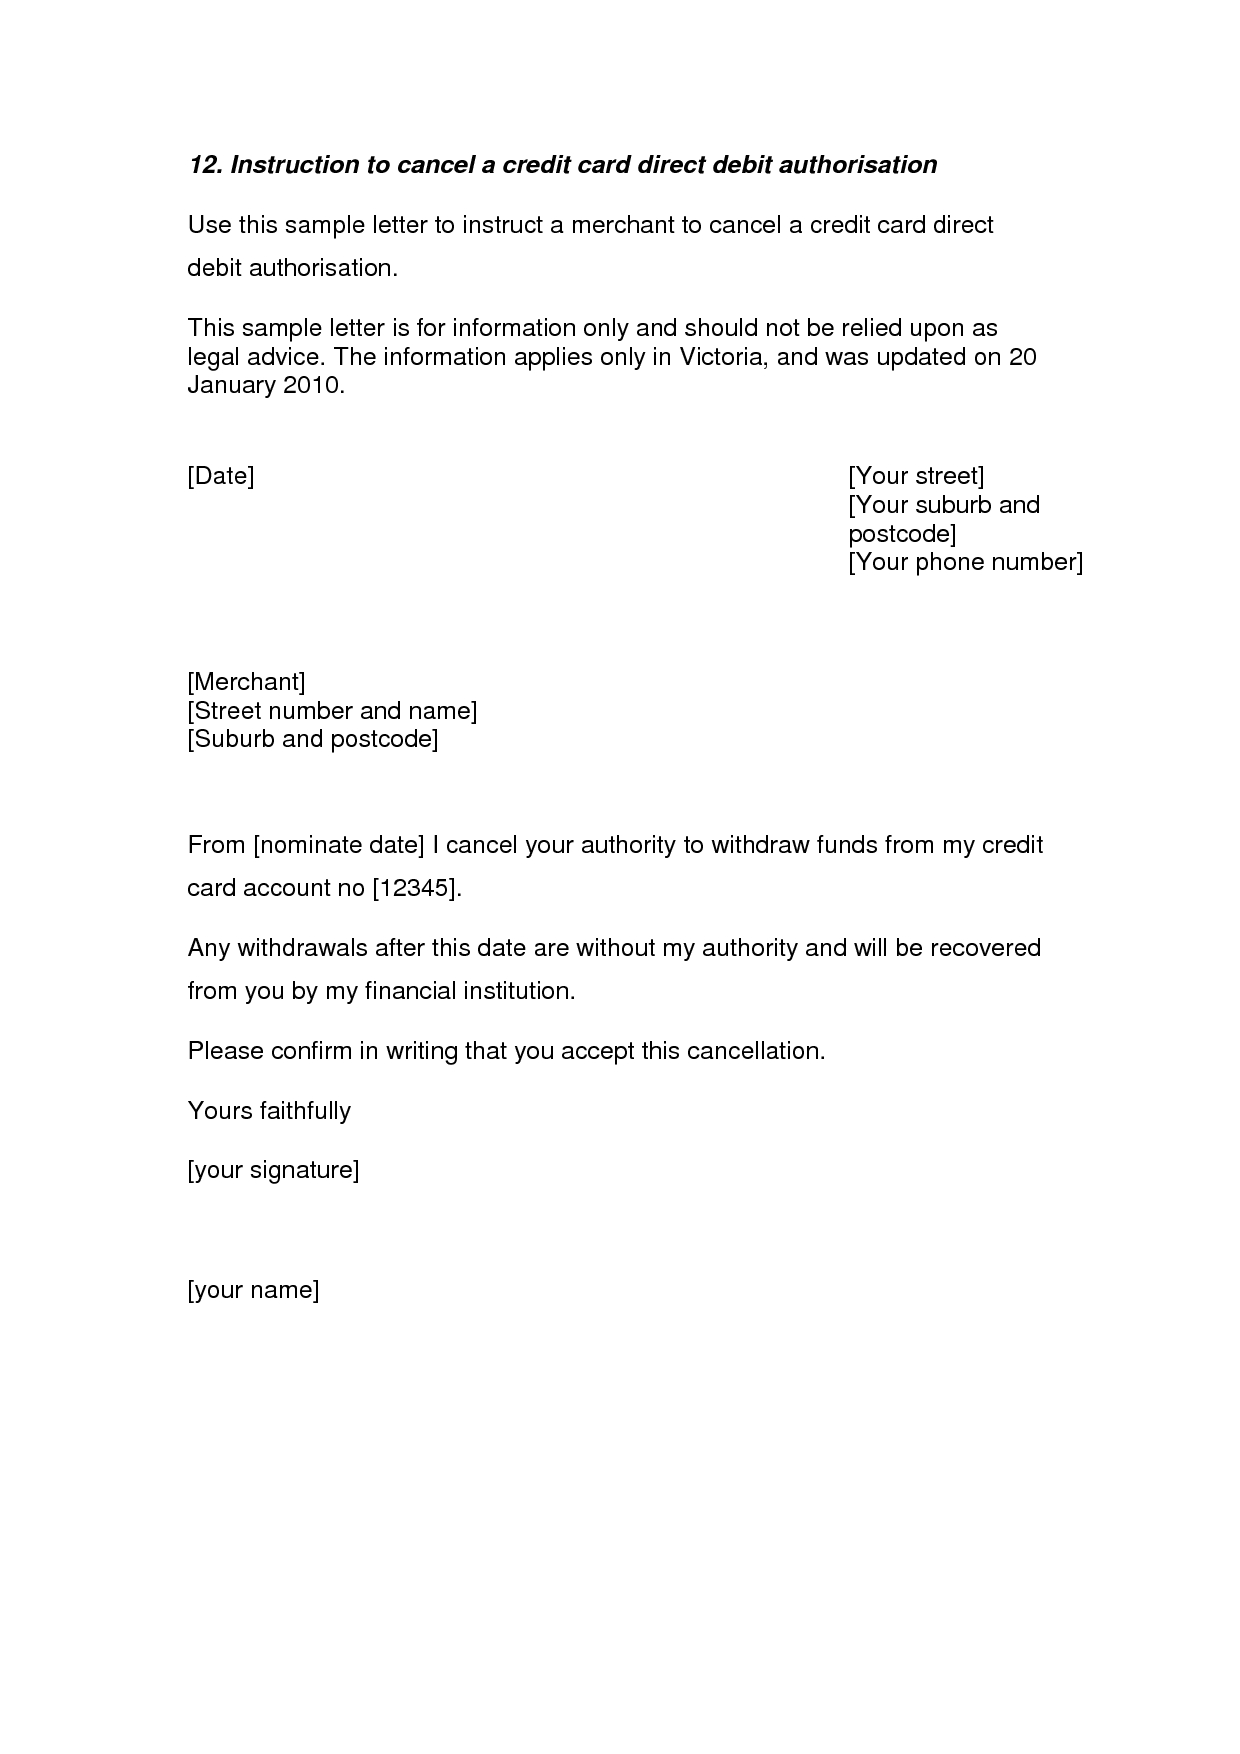 Independent Contractor Offer Letter Template - Credit Card Cancellation Letter A Credit Card Cancellation Letter